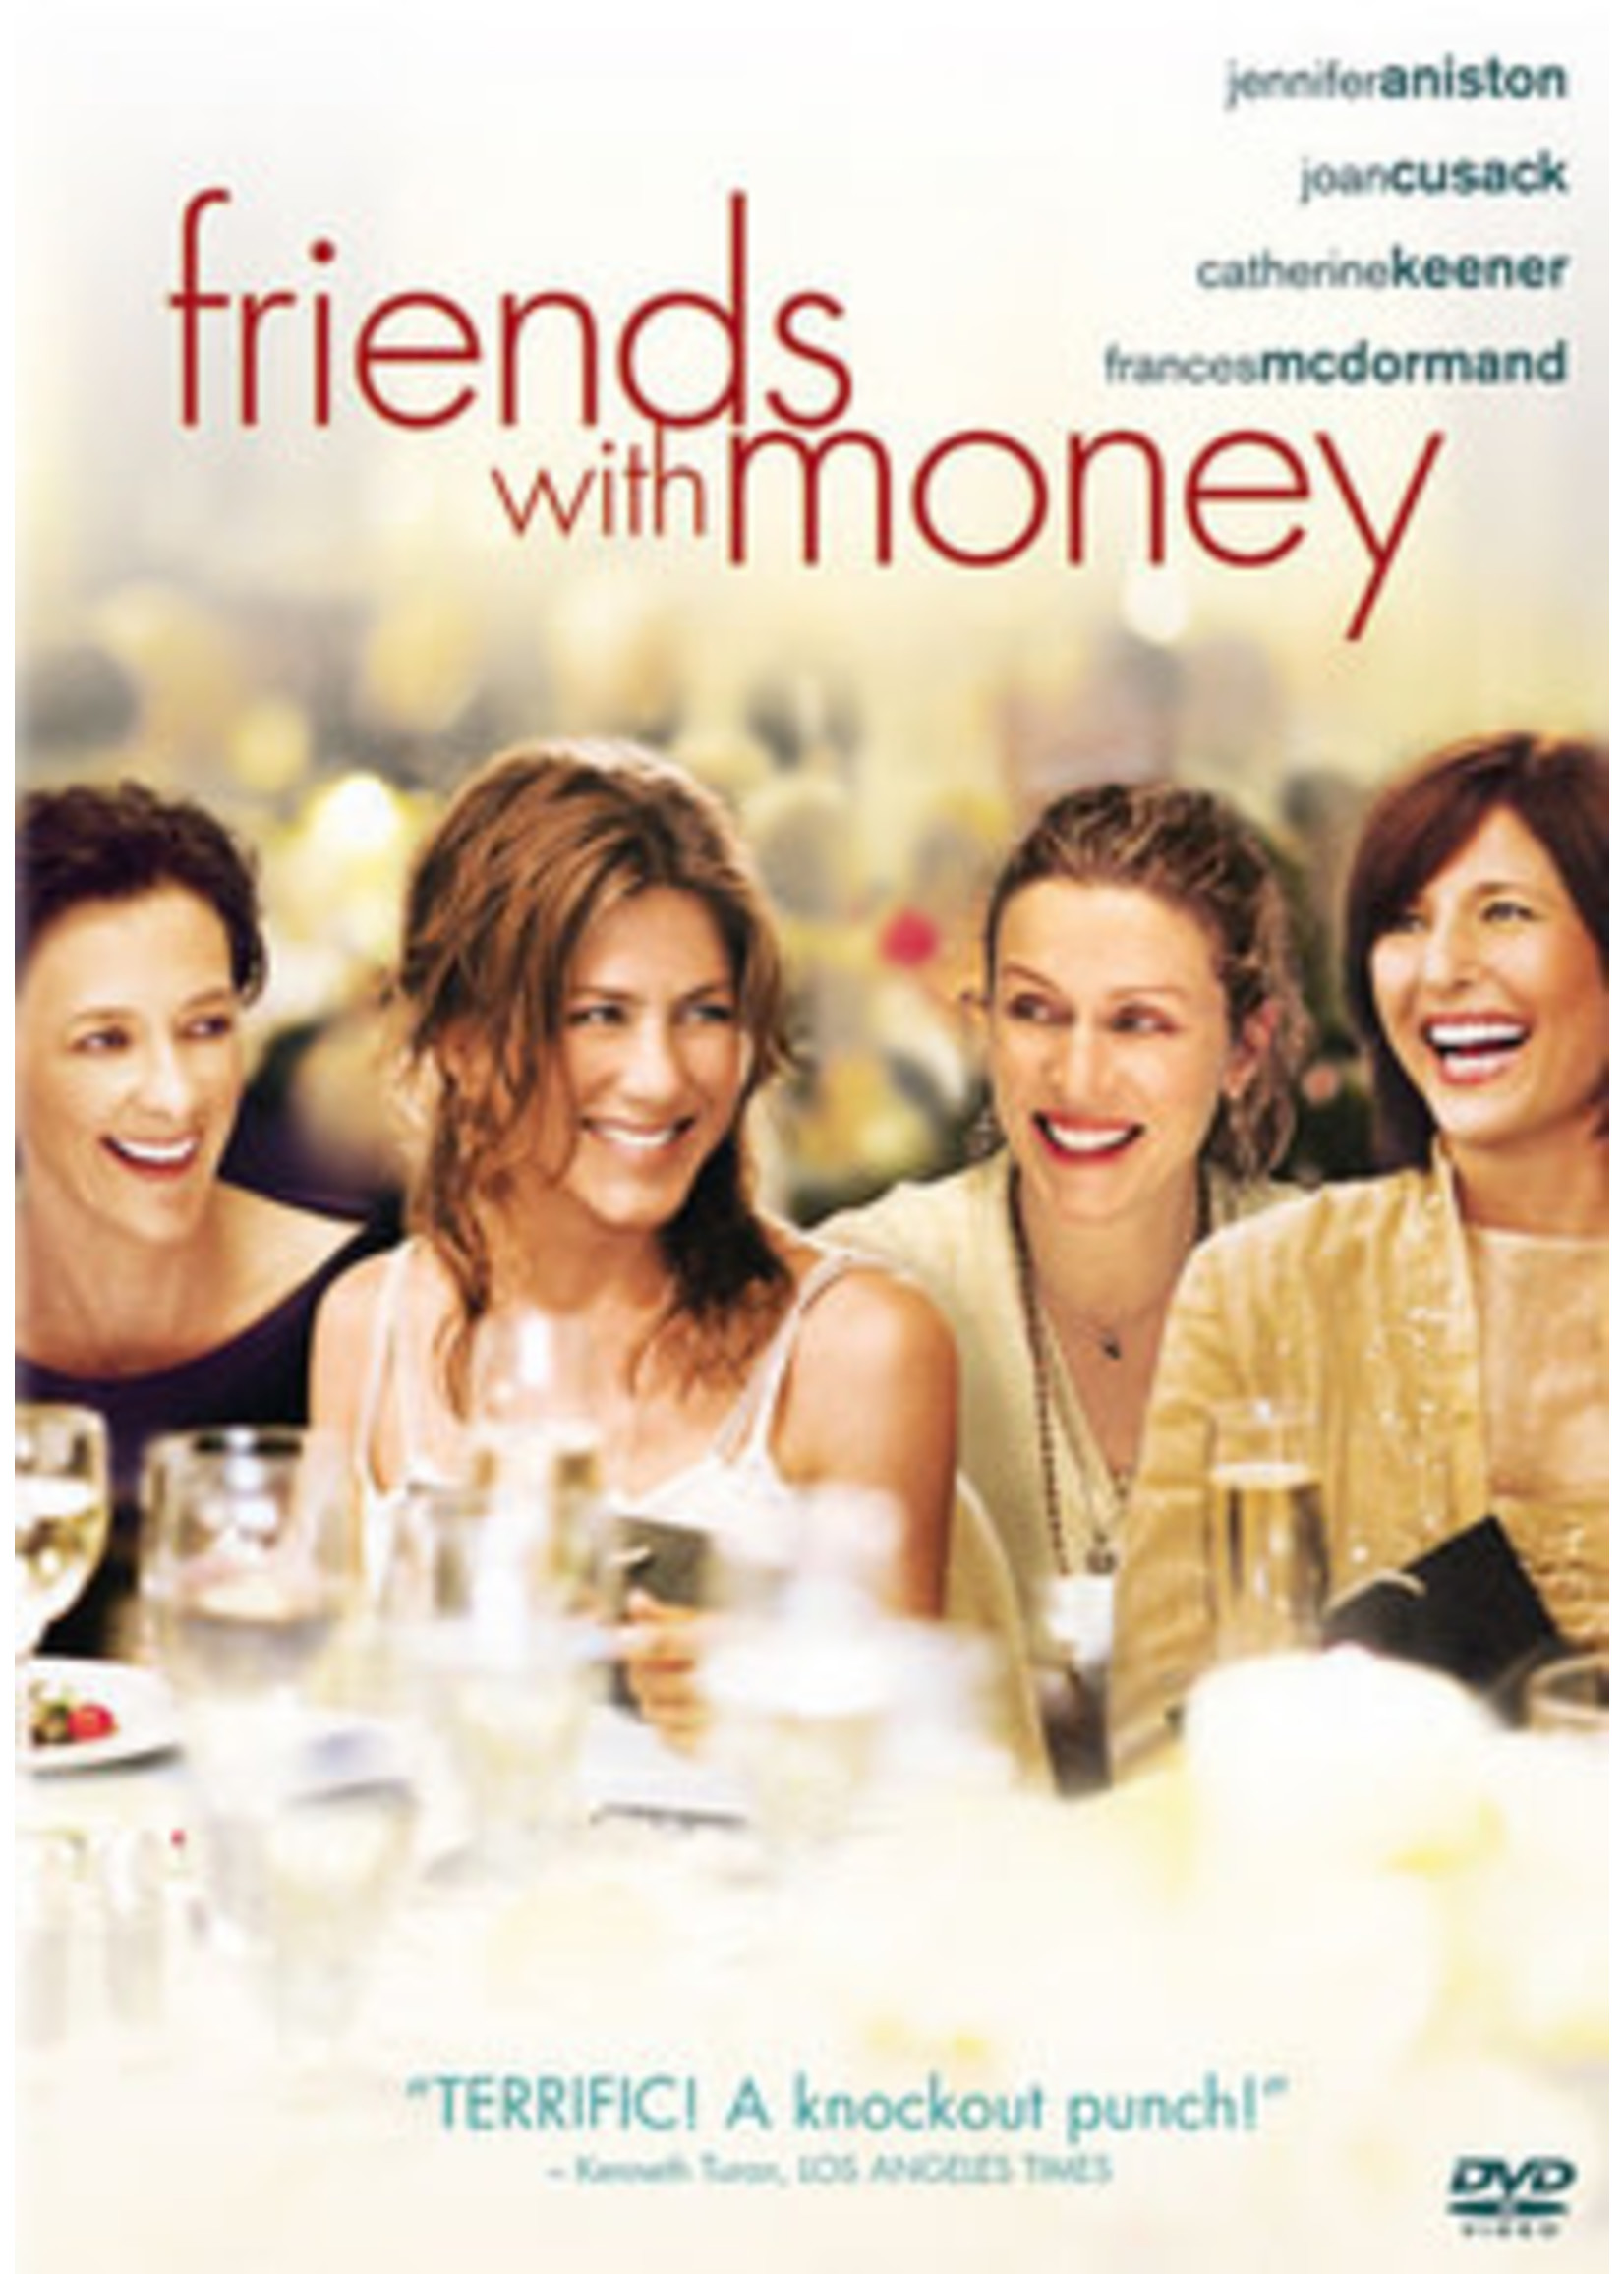 Friends with Money DVD